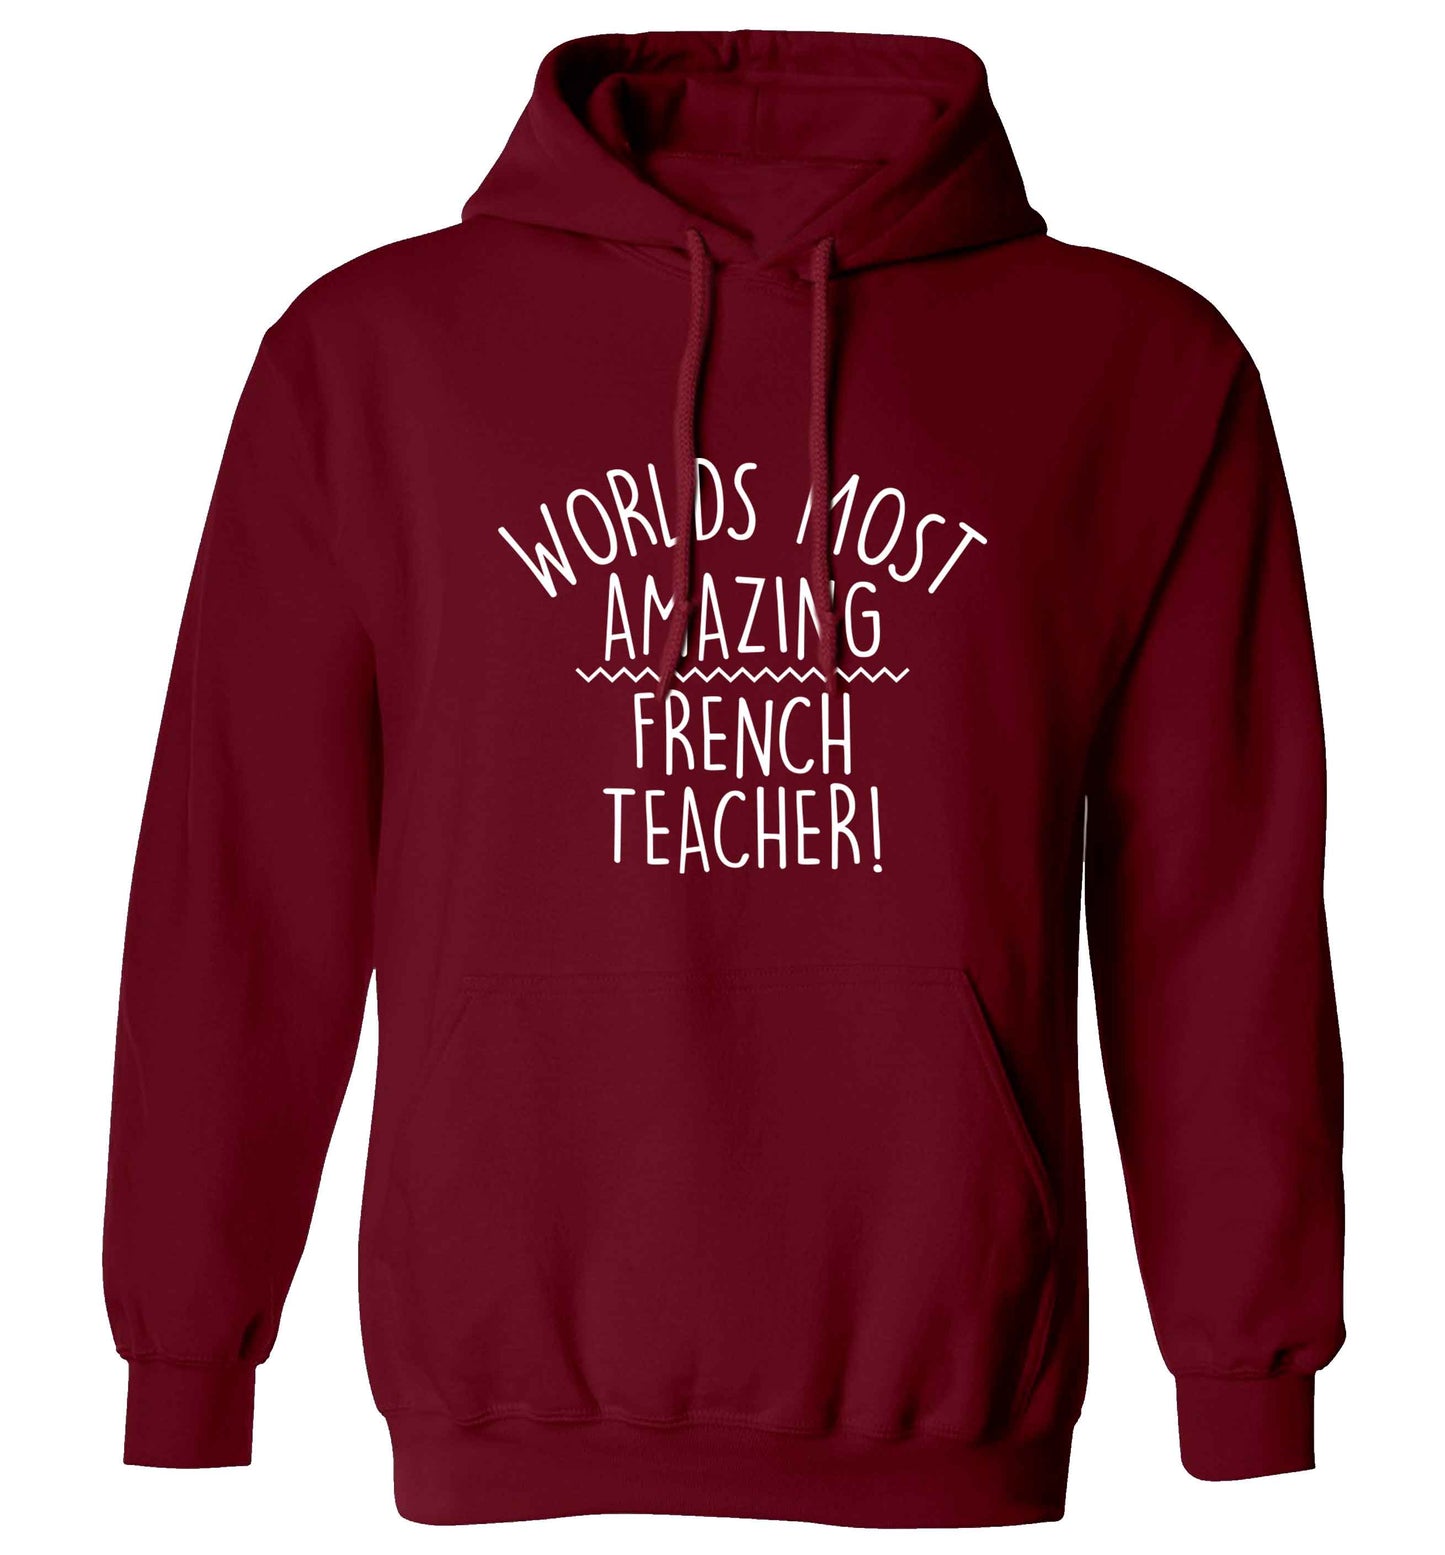 Worlds most amazing French teacher adults unisex maroon hoodie 2XL